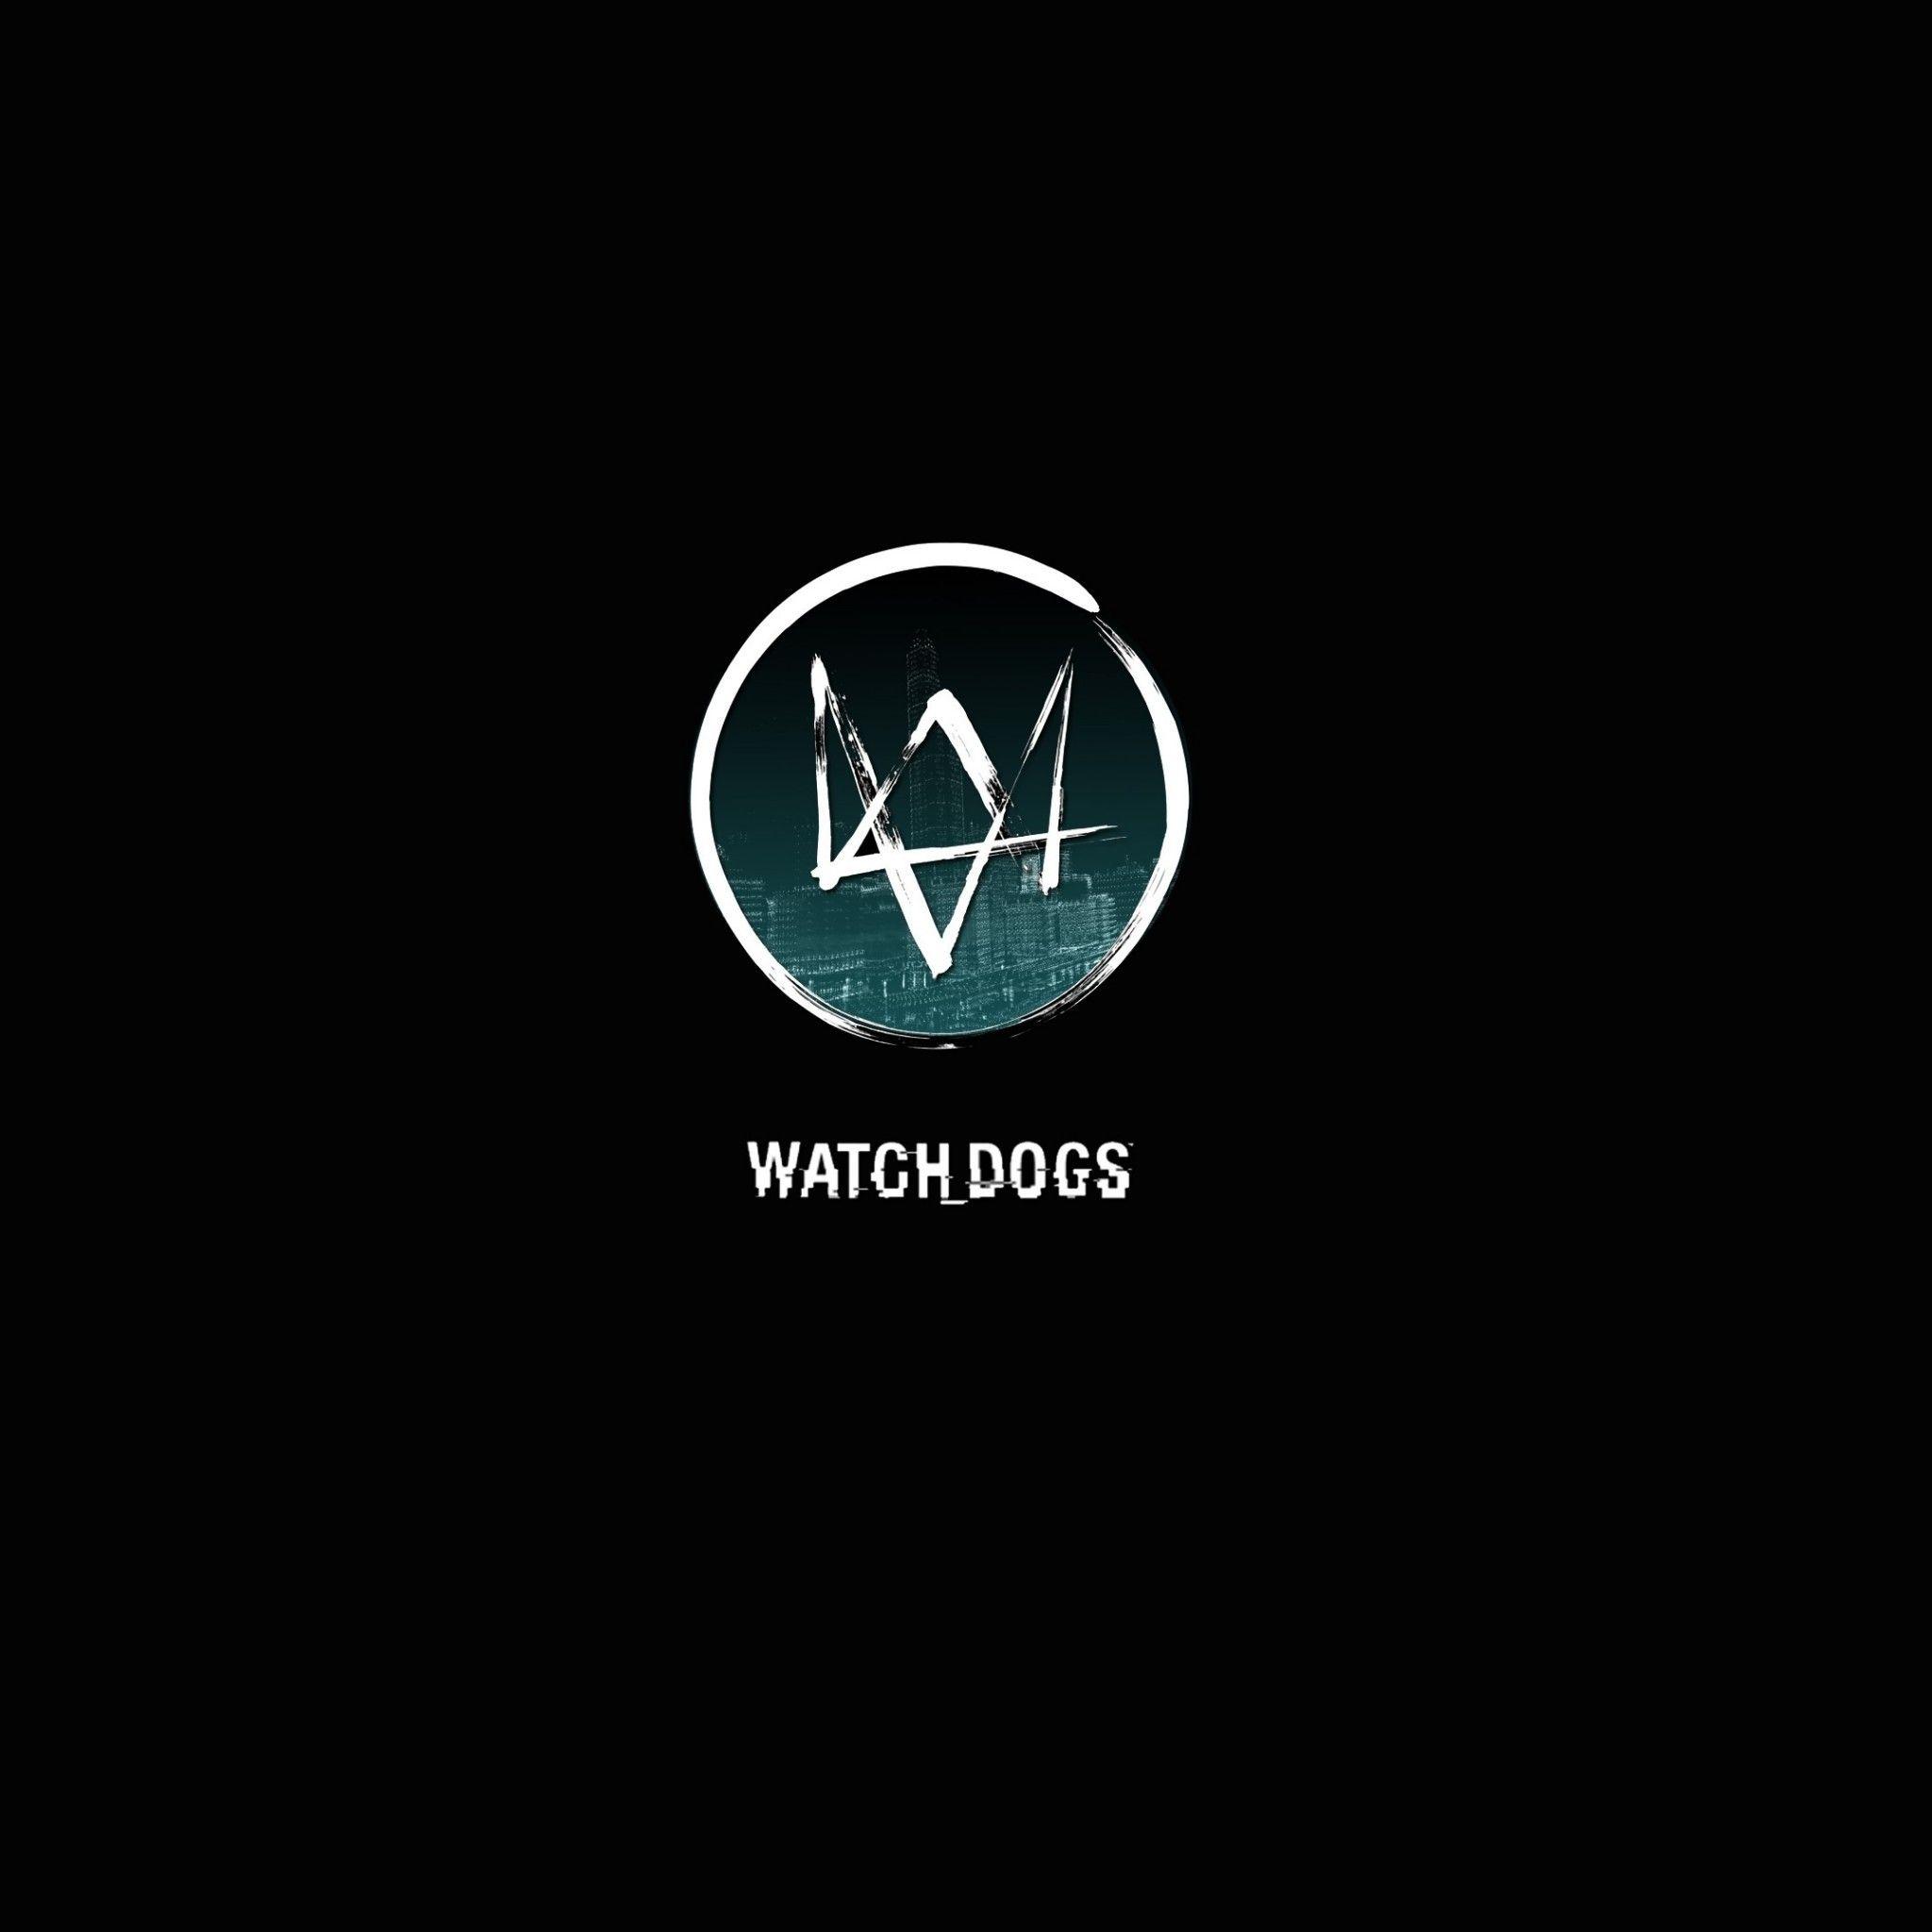 Watch Dogs Logo Wallpapers Top Free Watch Dogs Logo Backgrounds Wallpaperaccess